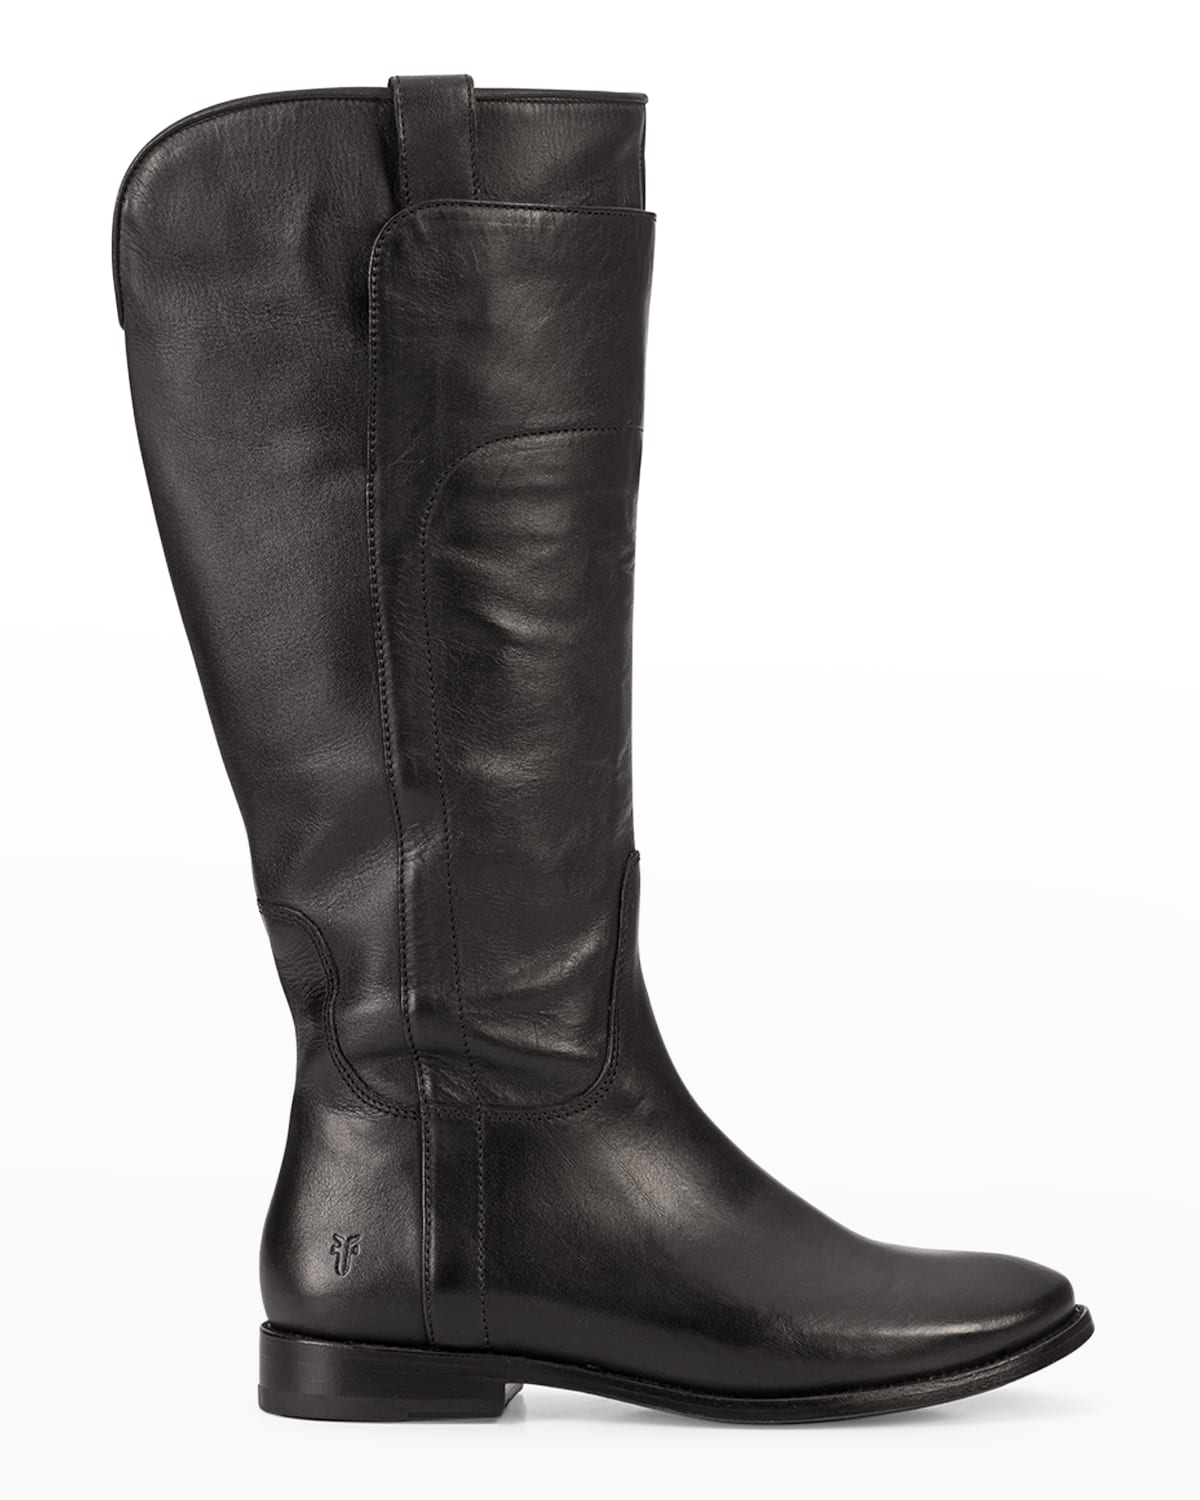 Paige Leather Tall Riding Boots